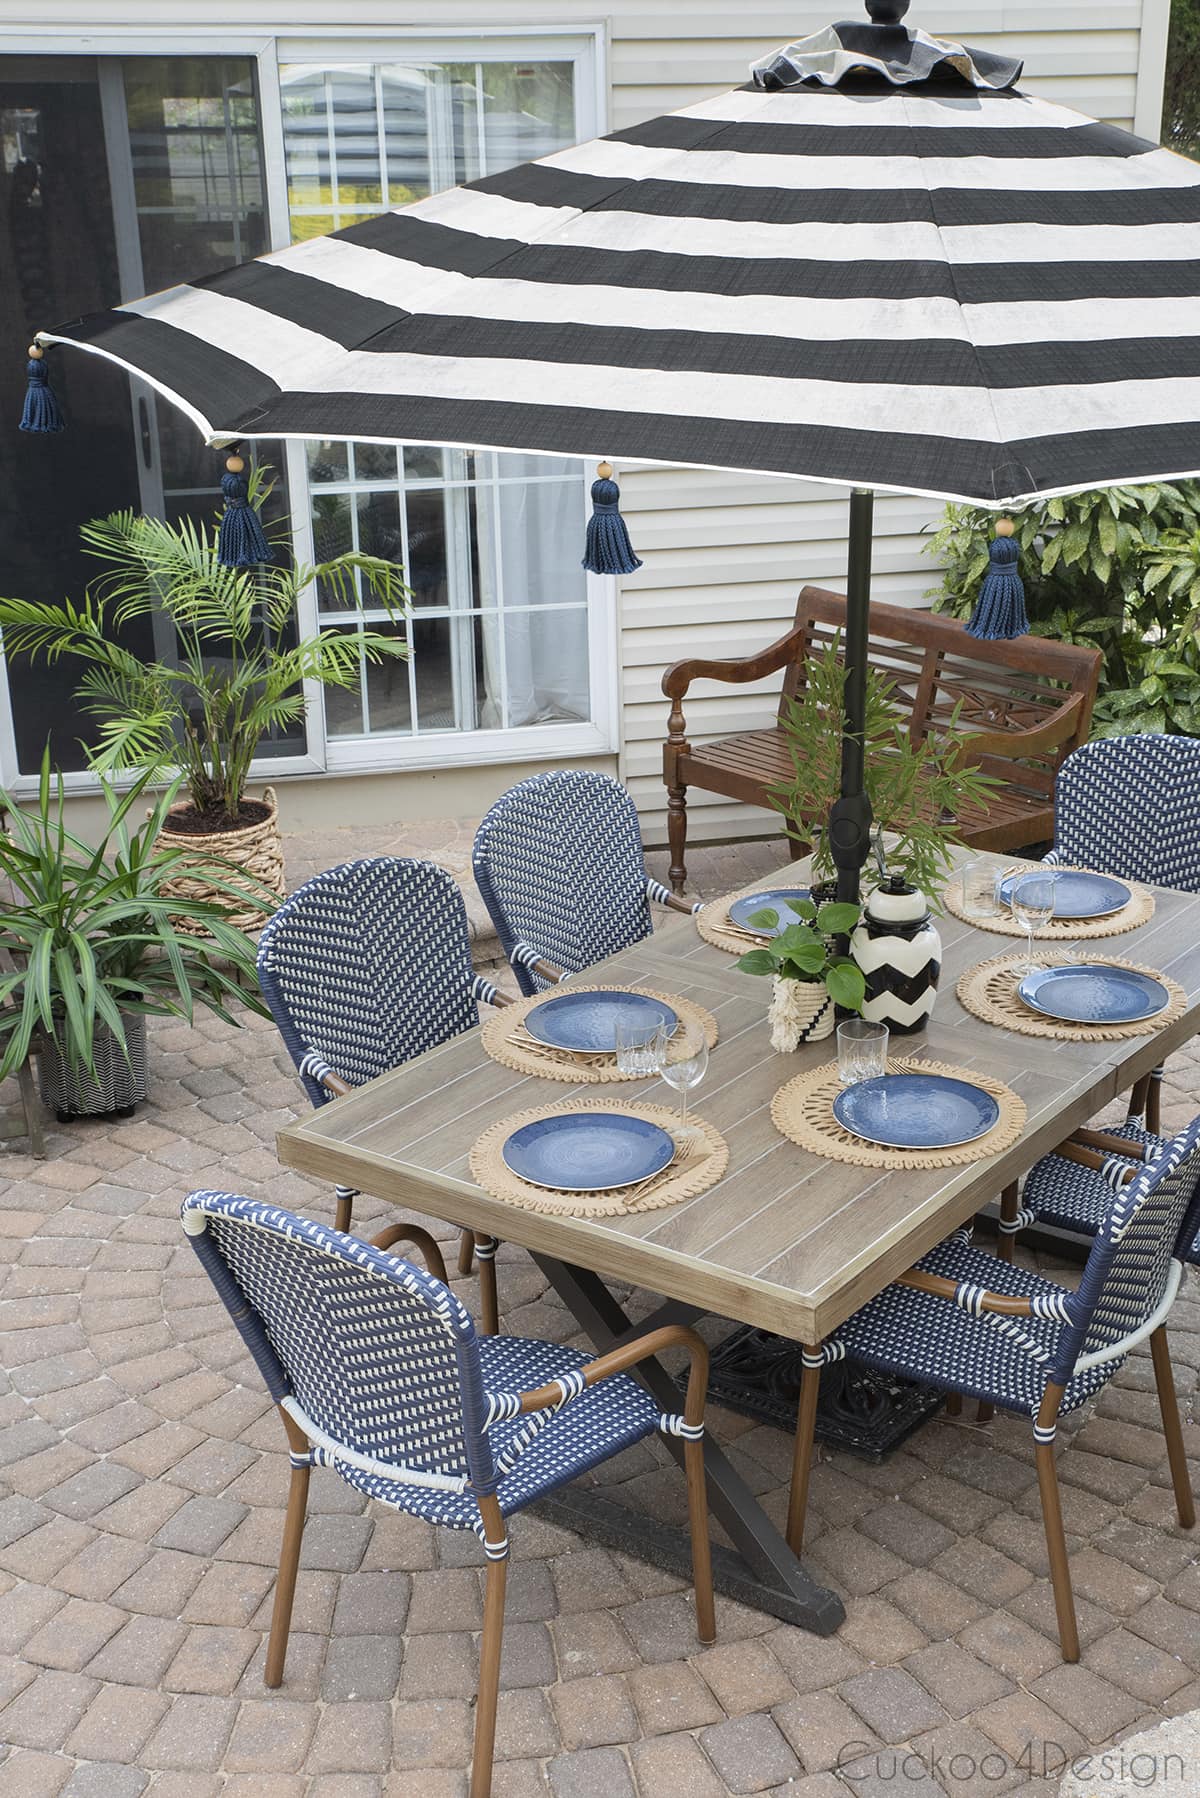 DIY tassel umbrella on patio with woven French bistro chairs